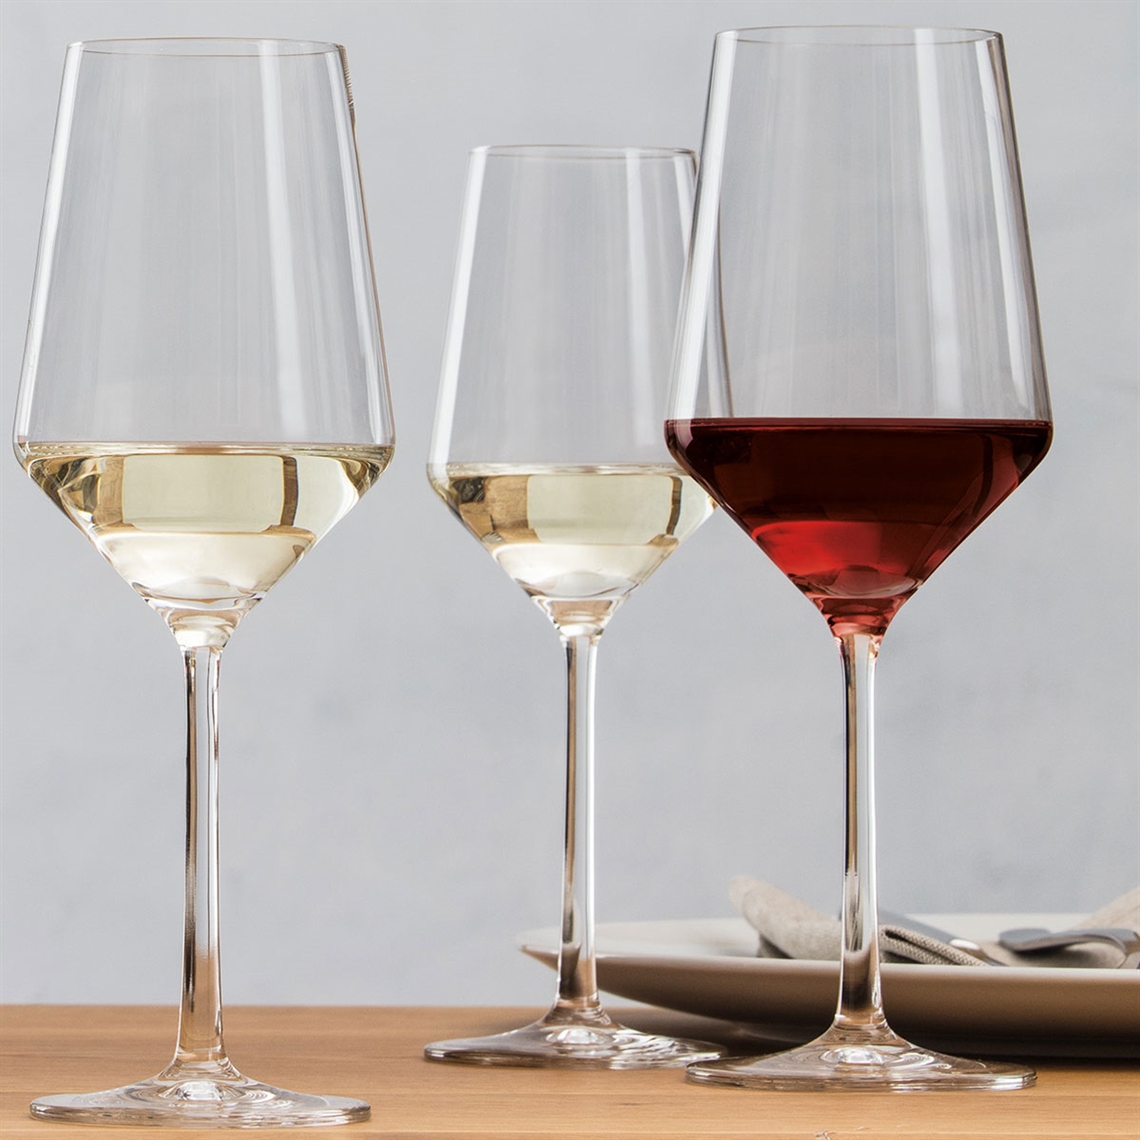 View our collection of Pure Schott Zwiesel Tritan Crystal Glass